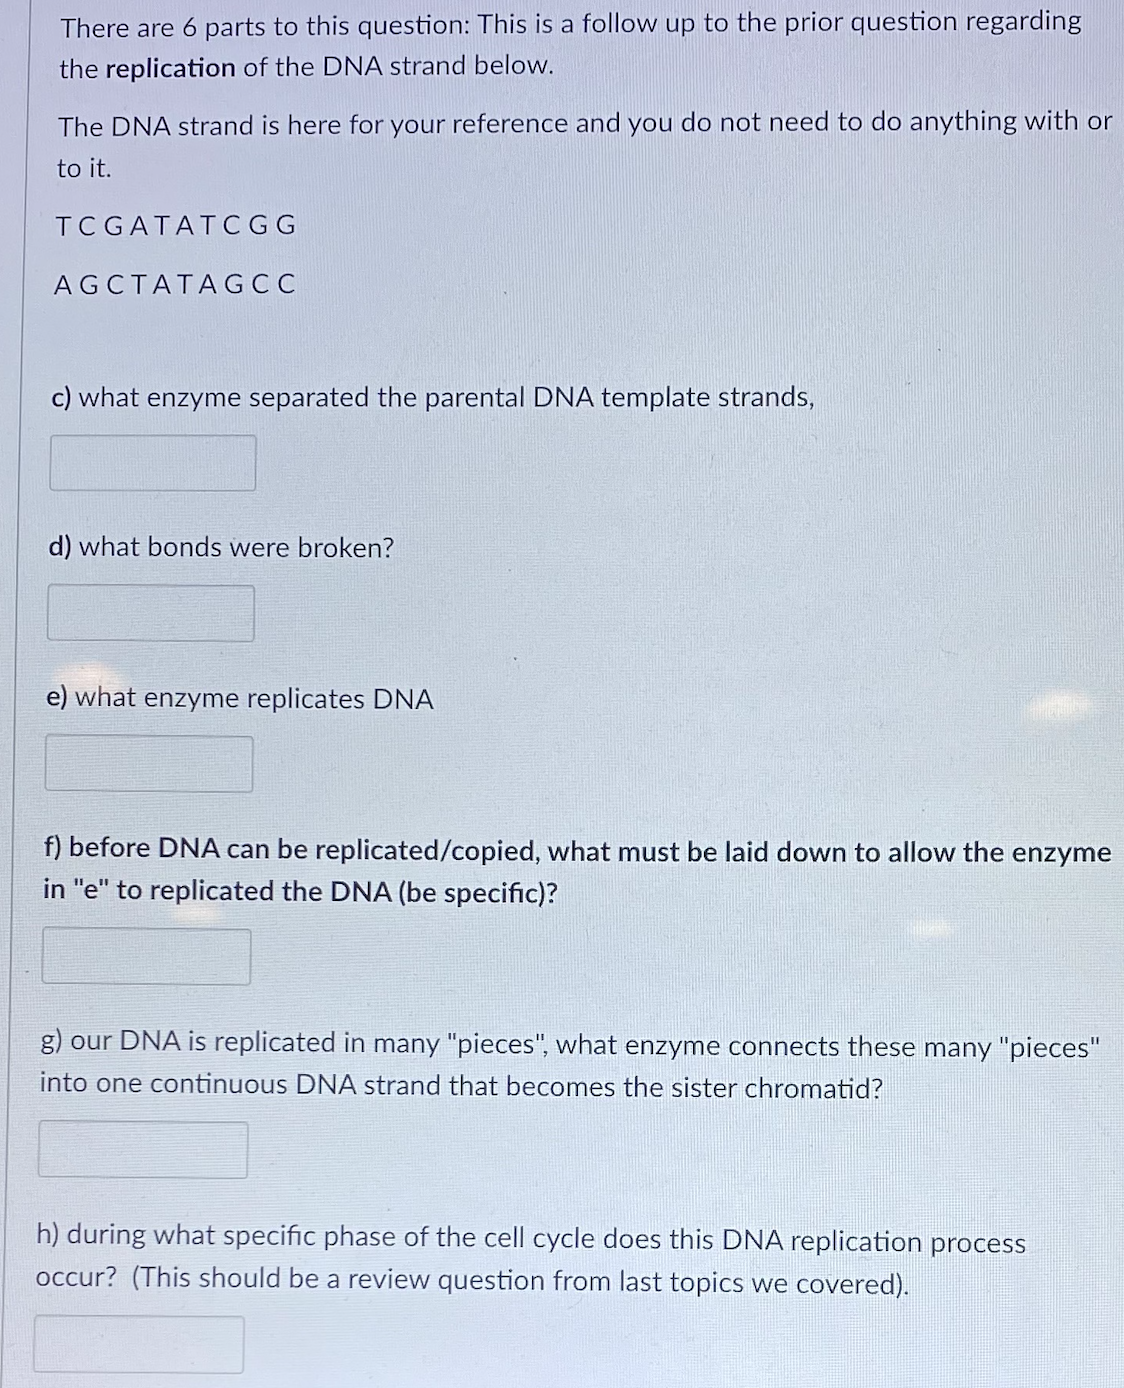 There are 6 parts to this question: This is a follow up to the prior question regarding
the replication of the DNA strand below.
The DNA strand is here for your reference and you do not need to do anything with or
to it.
TC GATATCGG
AGCTATAGCC
c) what enzyme separated the parental DNA template strands,
d) what bonds were broken?
e) what enzyme replicates DNA
f) before DNA can be replicated/copied, what must be laid down to allow the enzyme
in "e" to replicated the DNA (be specific)?
g) our DNA is replicated in many "pieces", what enzyme connects these many "pieces"
into one continuous DNA strand that becomes the sister chromatid?
h) during what specific phase of the cell cycle does this DNA replication process
occur? (This should be a review question from last topics we covered).
